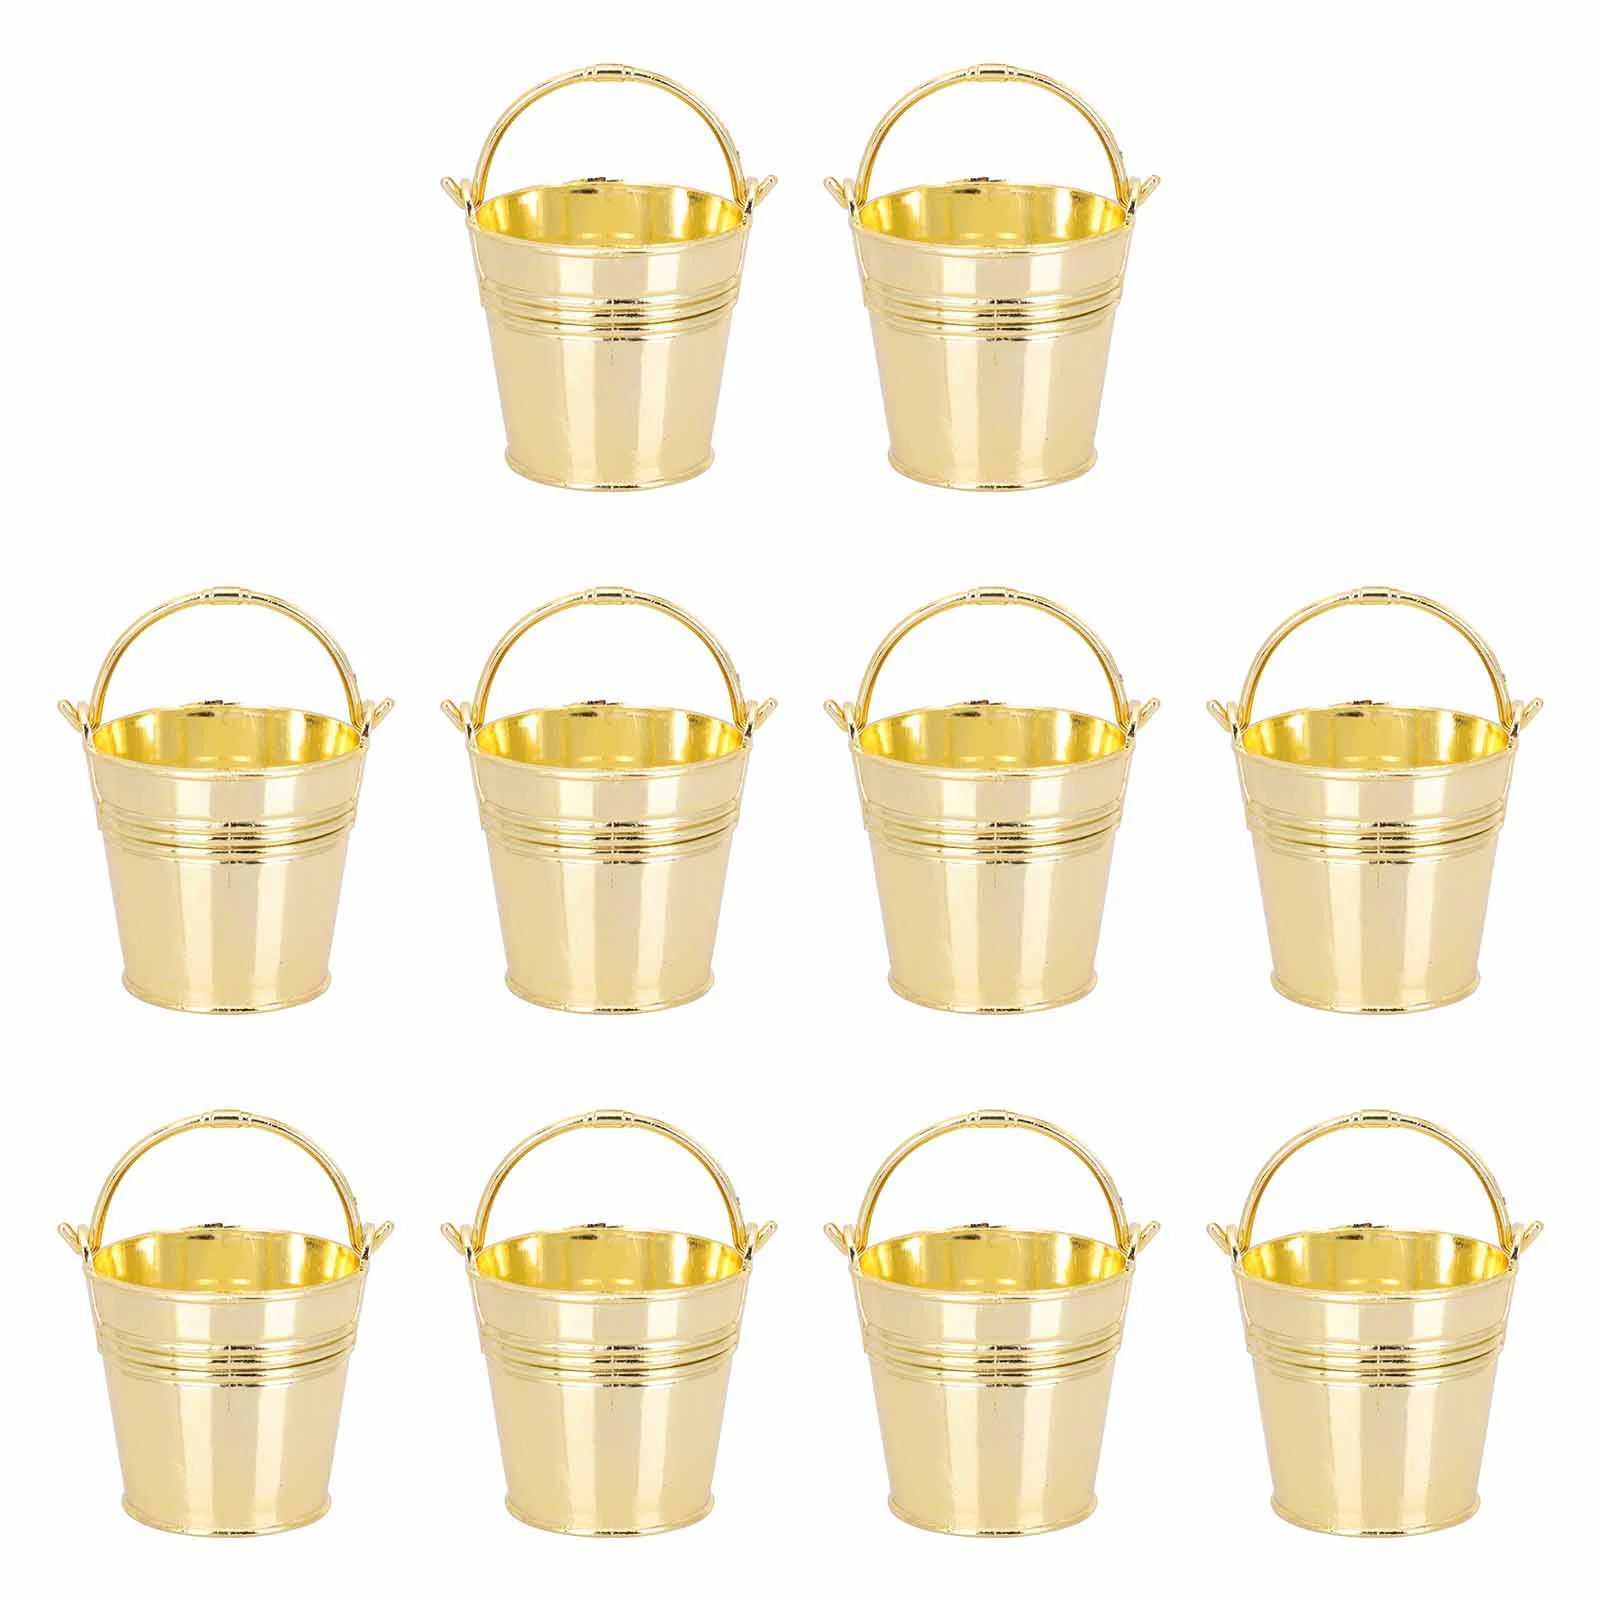 

Buckets Metal Bucket Candy Mini Pail Tin Storage Pails Wedding Holder Party Container Snack Flower Gift Favor Handle Tinplate